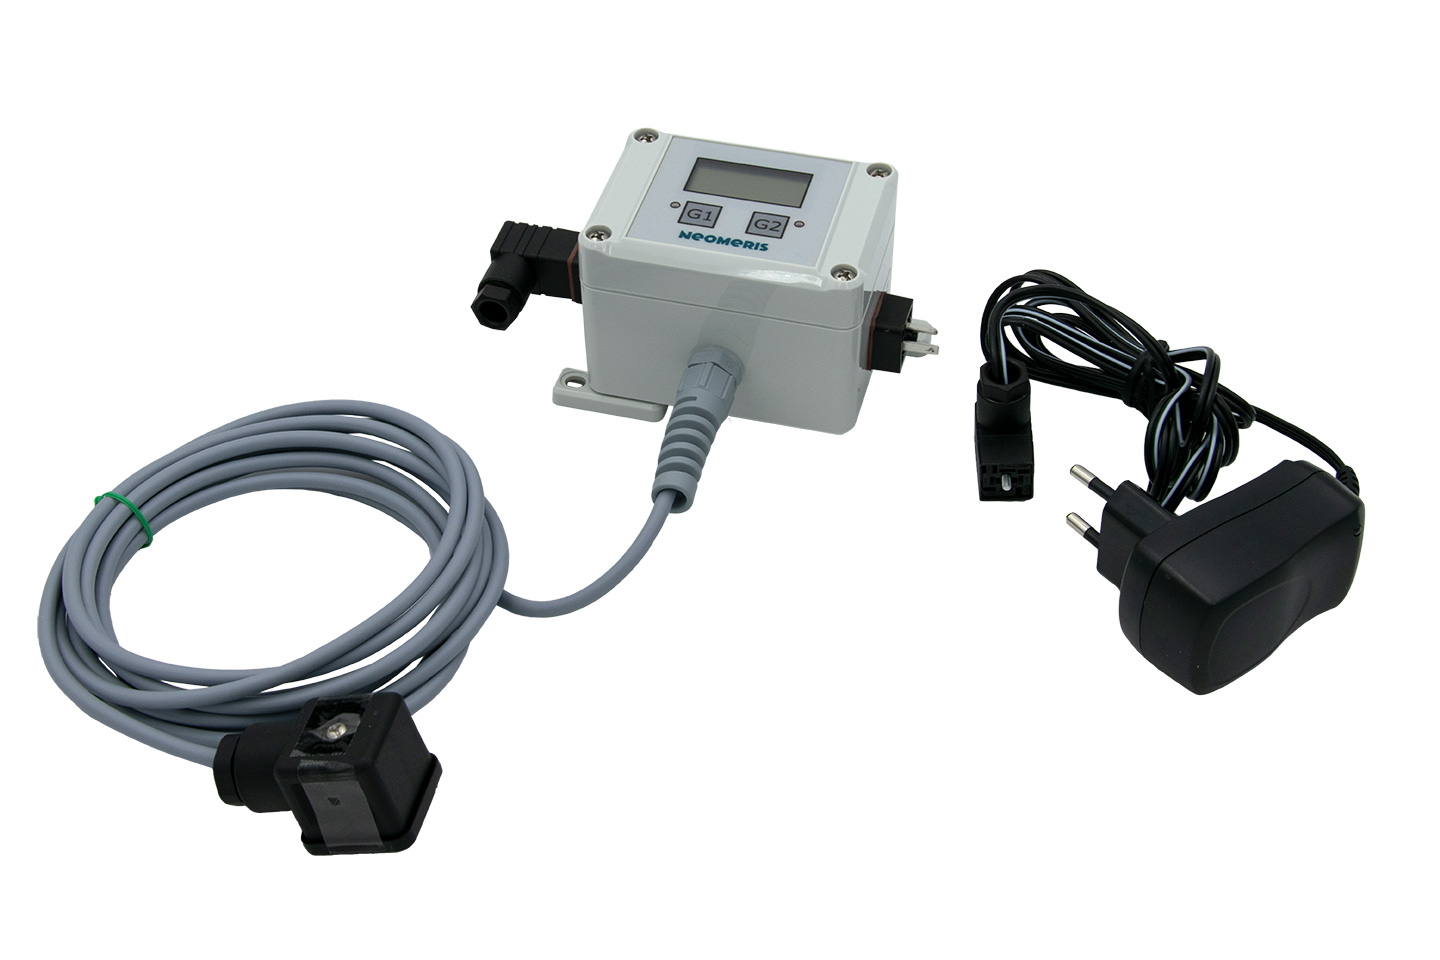 N-LFW, conductivity measuring instrument with 3m hardwired connection cable